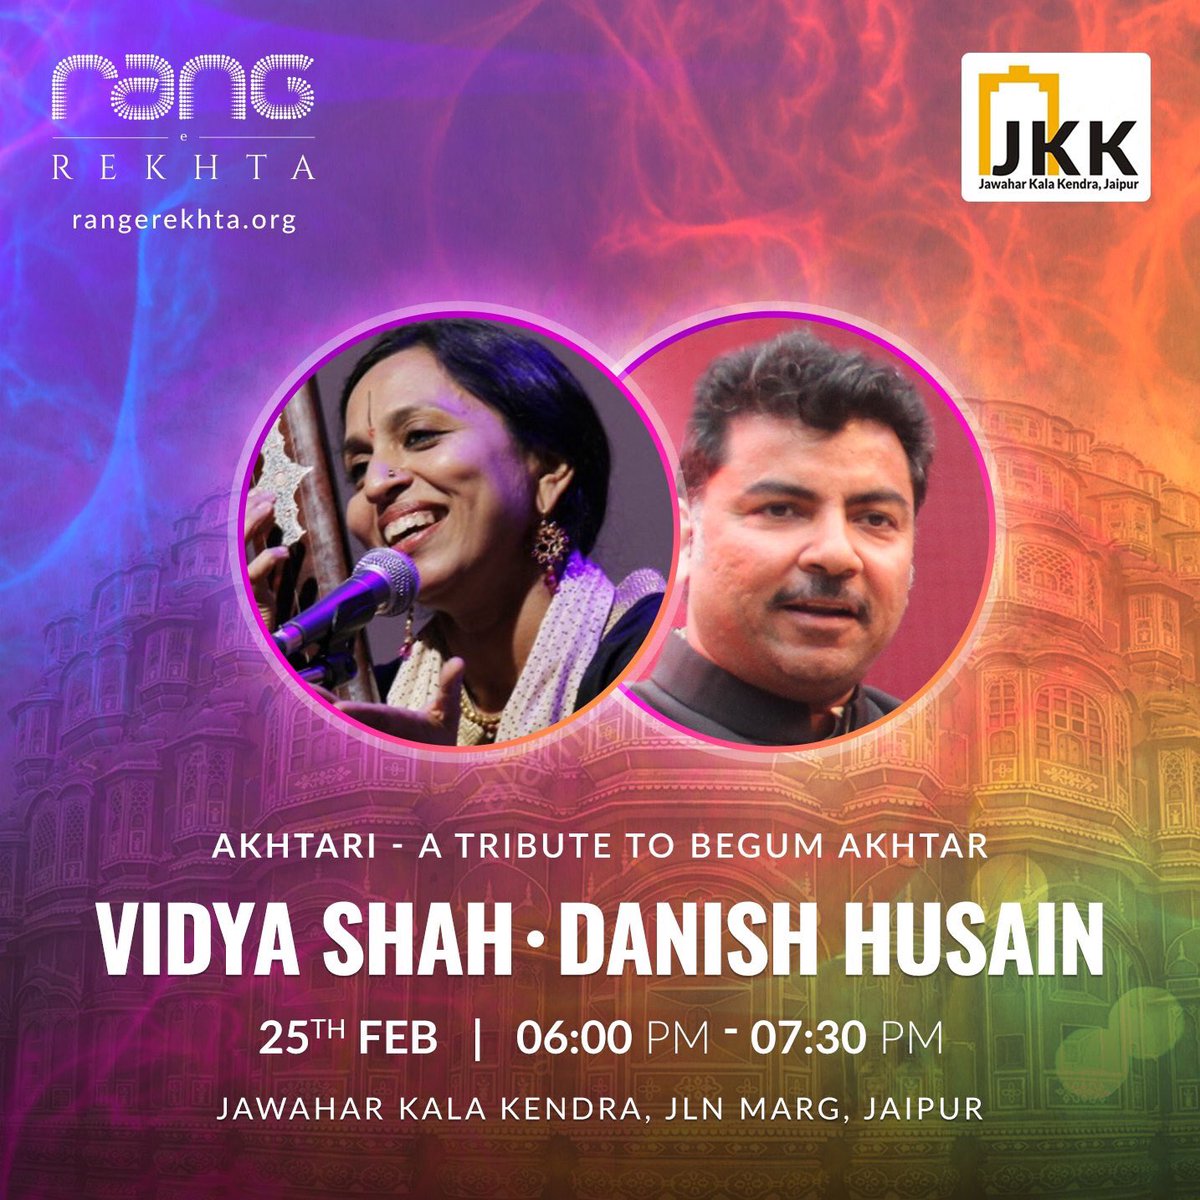 #BegumAkhtar fans, we’re back with #Akhtari at #RangeRekhta at #Jaipur Catch us there this Sunday, Feb 25 at 6.00 pm at @JKK_Jaipur @RangeRekhta @Rekhta @JashneRekhta with @vidyasings and I. #MusicalStorytelling #UrduPoetry #Thumri #OldFilmSongs #Qissagoi